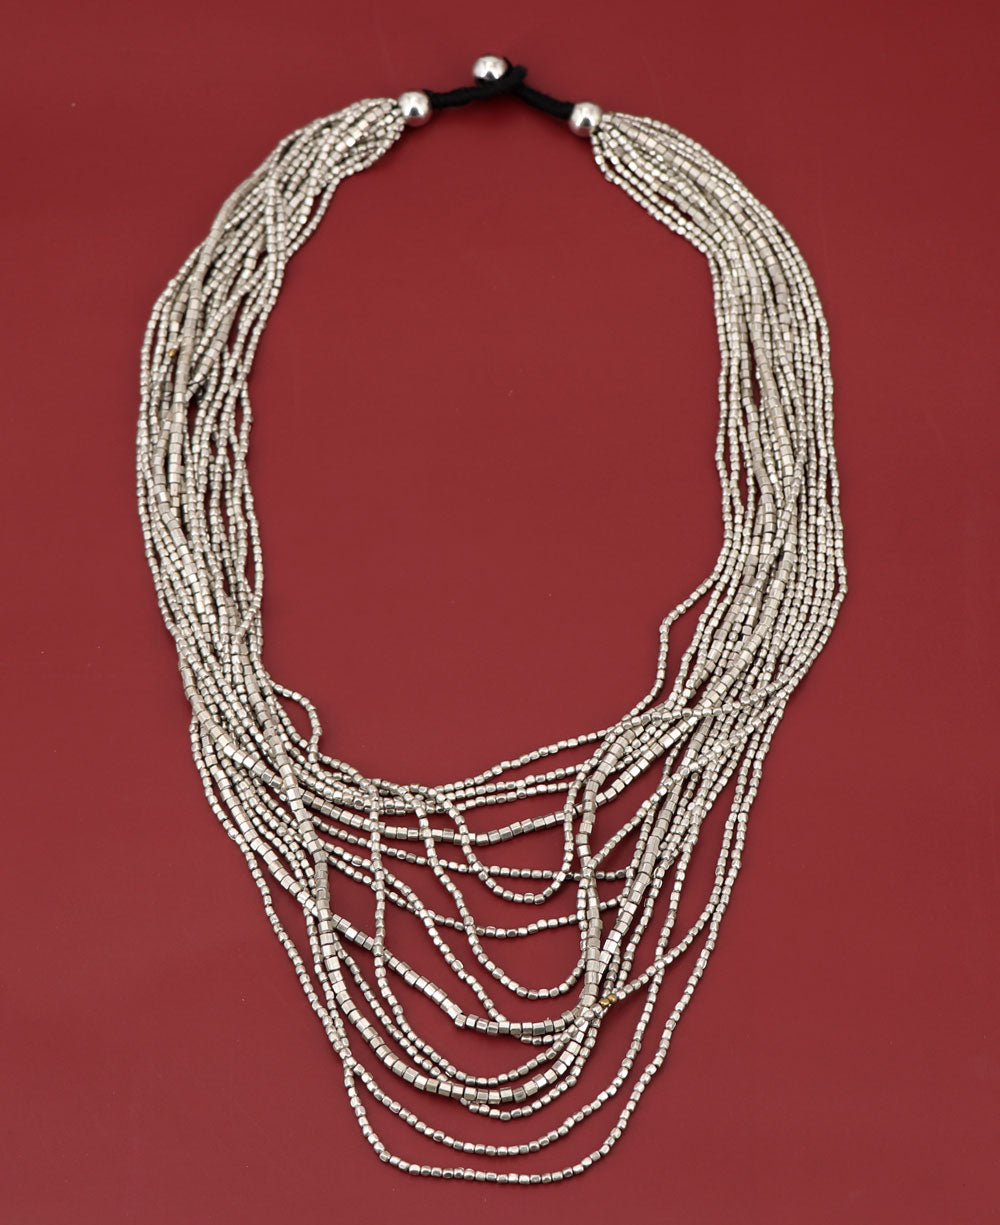 Artisan-crafted metal bead necklace from India